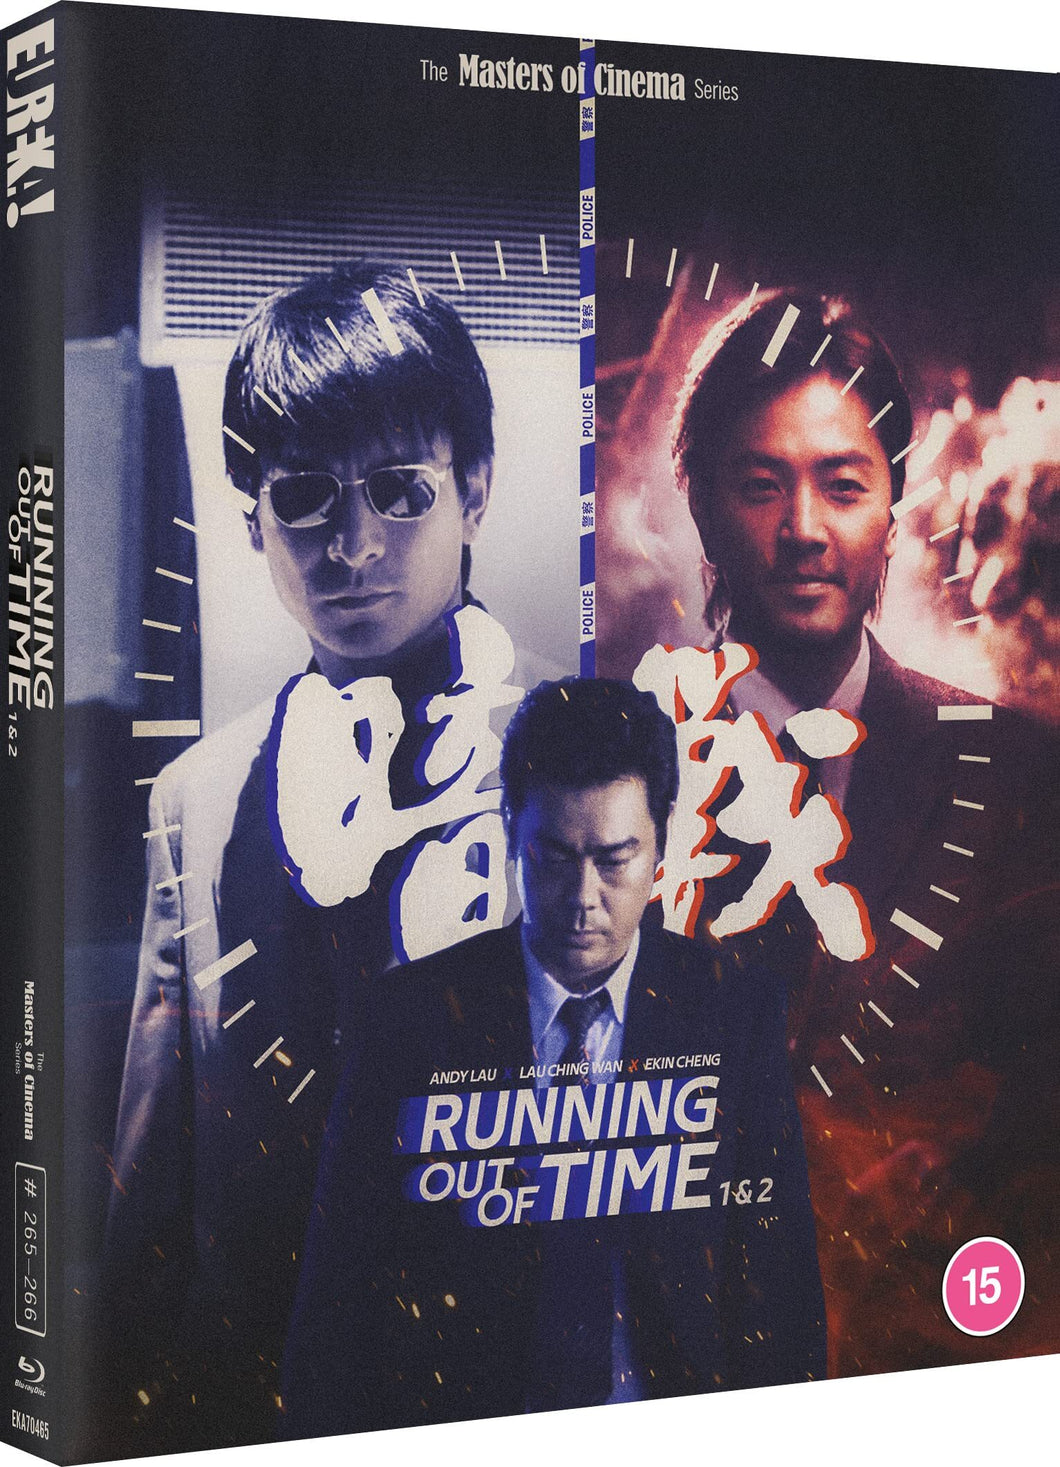 Running Out of Time 1 & 2 (1999-2001) de Johnnie To, Wing-Cheong Law - front cover